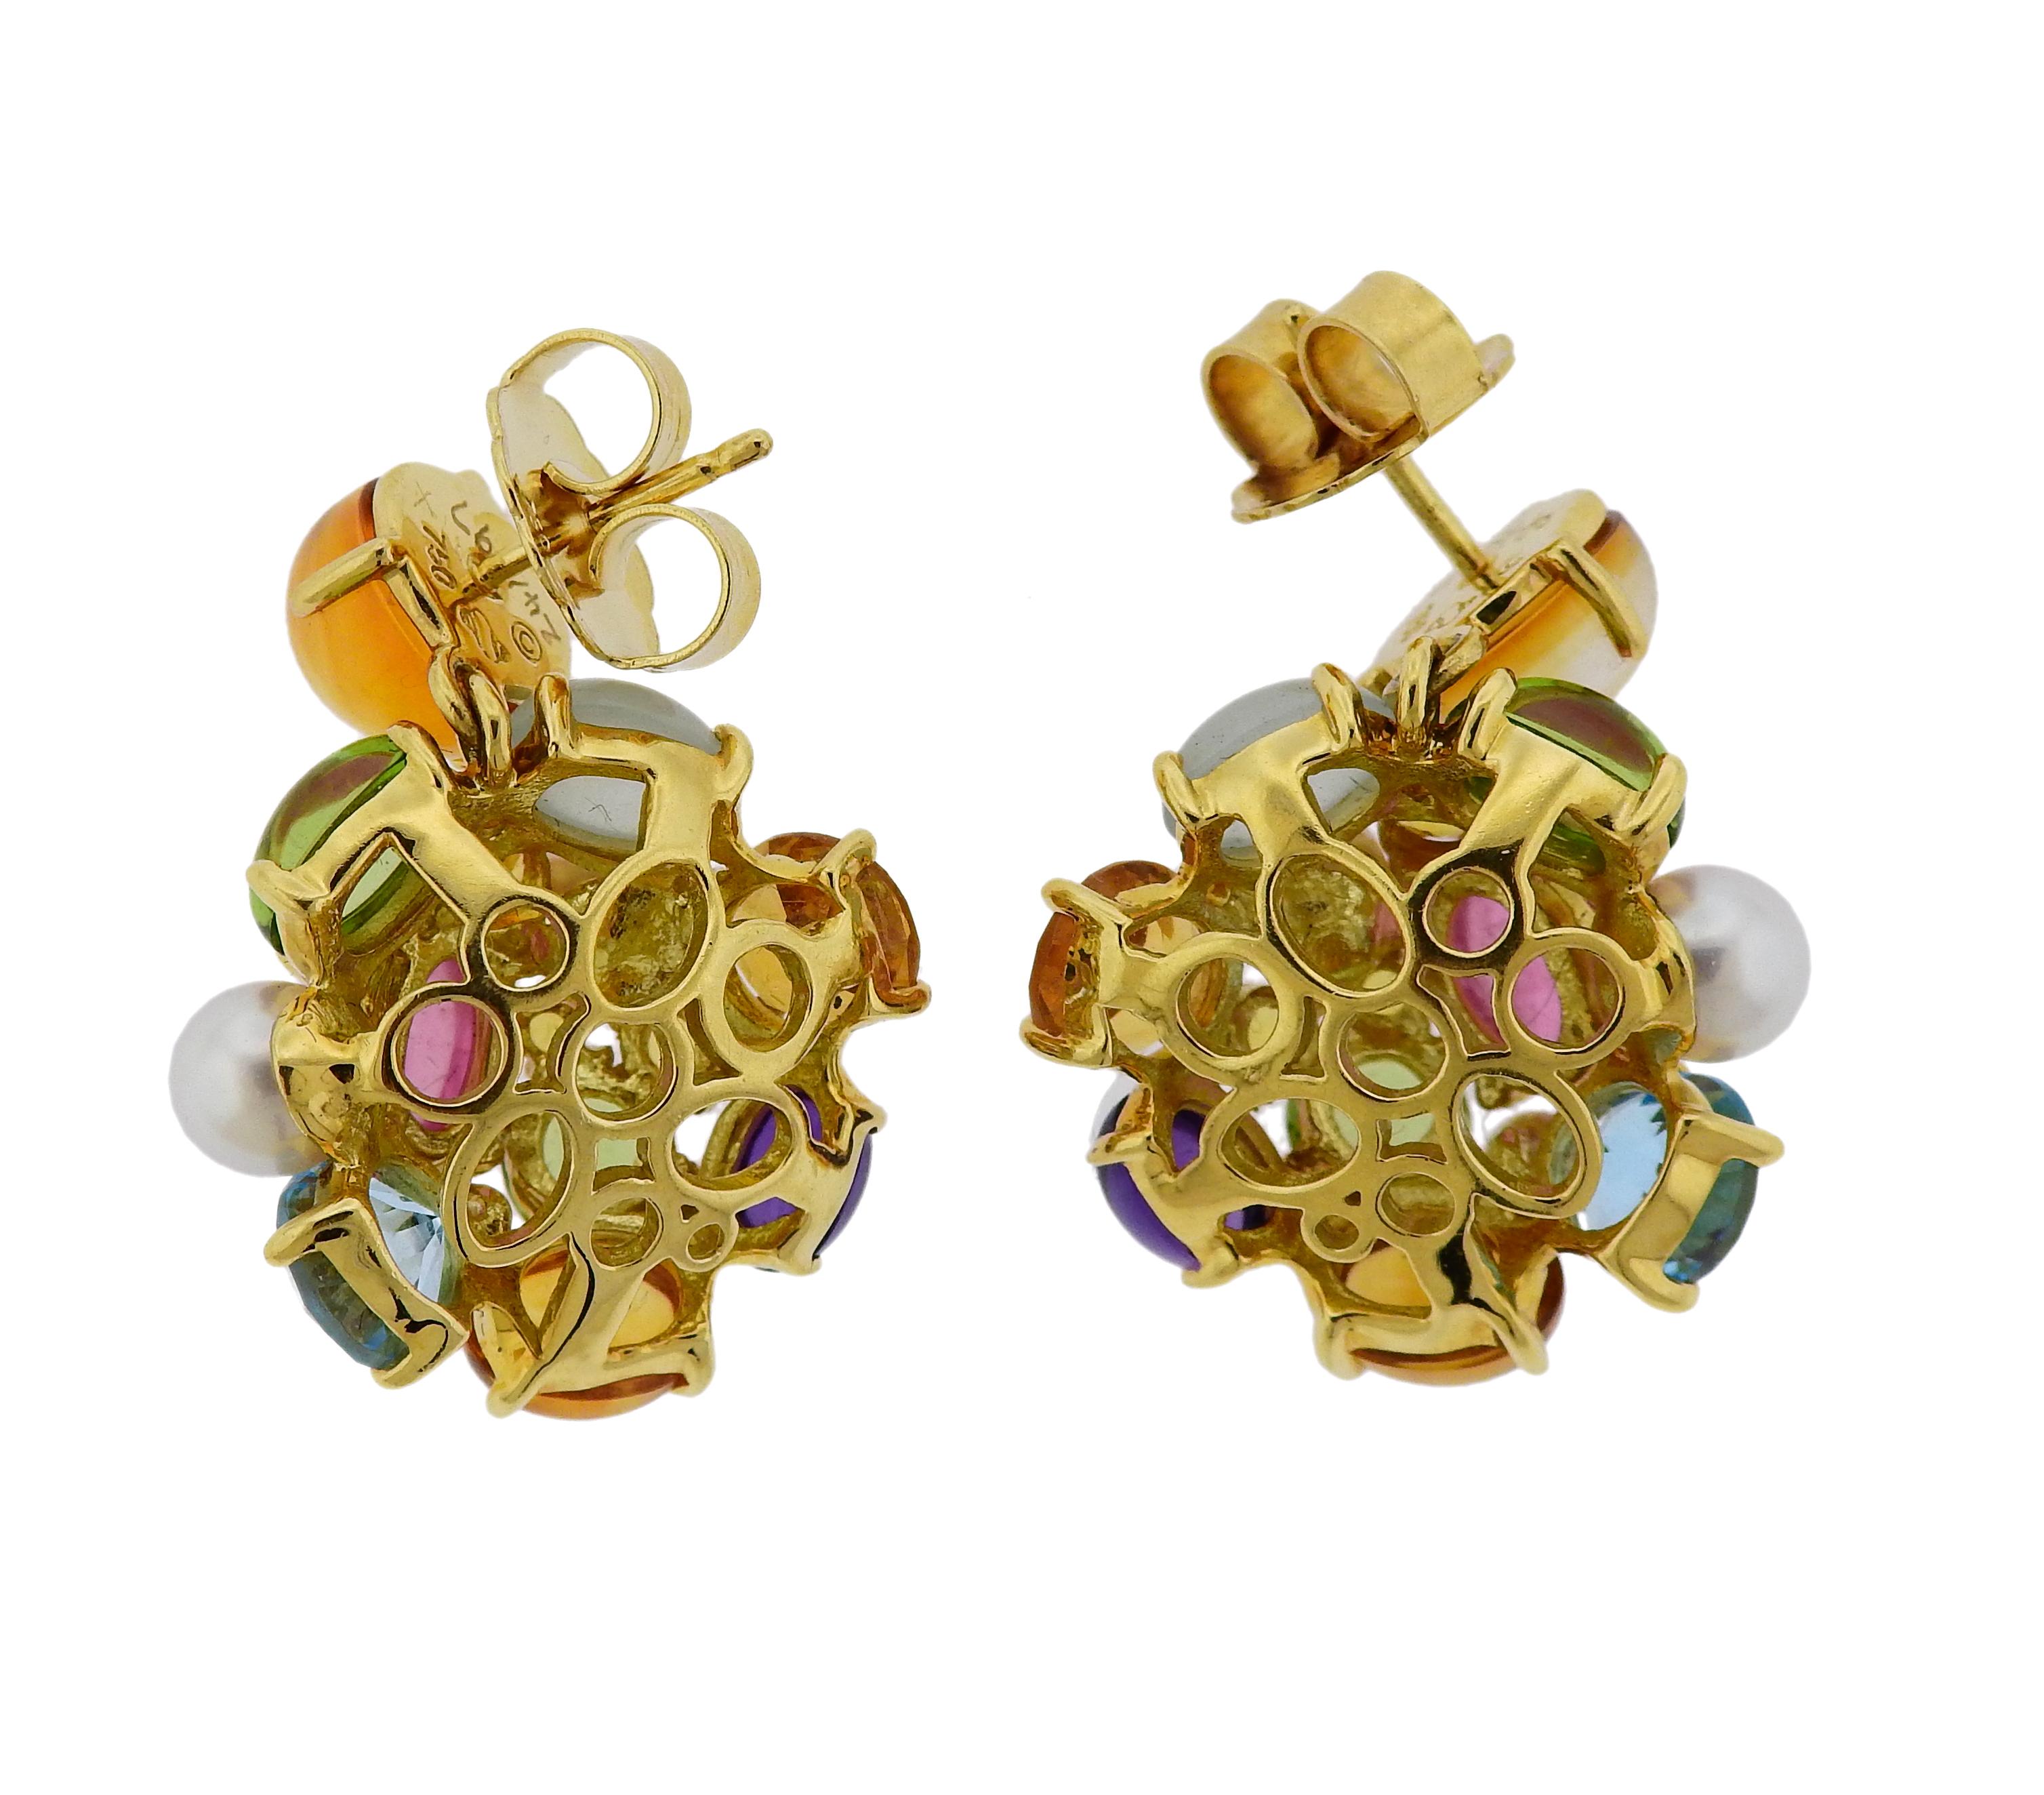 Pair of colorful 18k gold cocktail earrings by Seaman Schepps, set with pearls, tourmalines, citrines, aquamarines, peridots and amethyst.  Earrings are 30mm 21mm, weigh 16.7 grams. Marked:  Shell mark, 750, 241693.